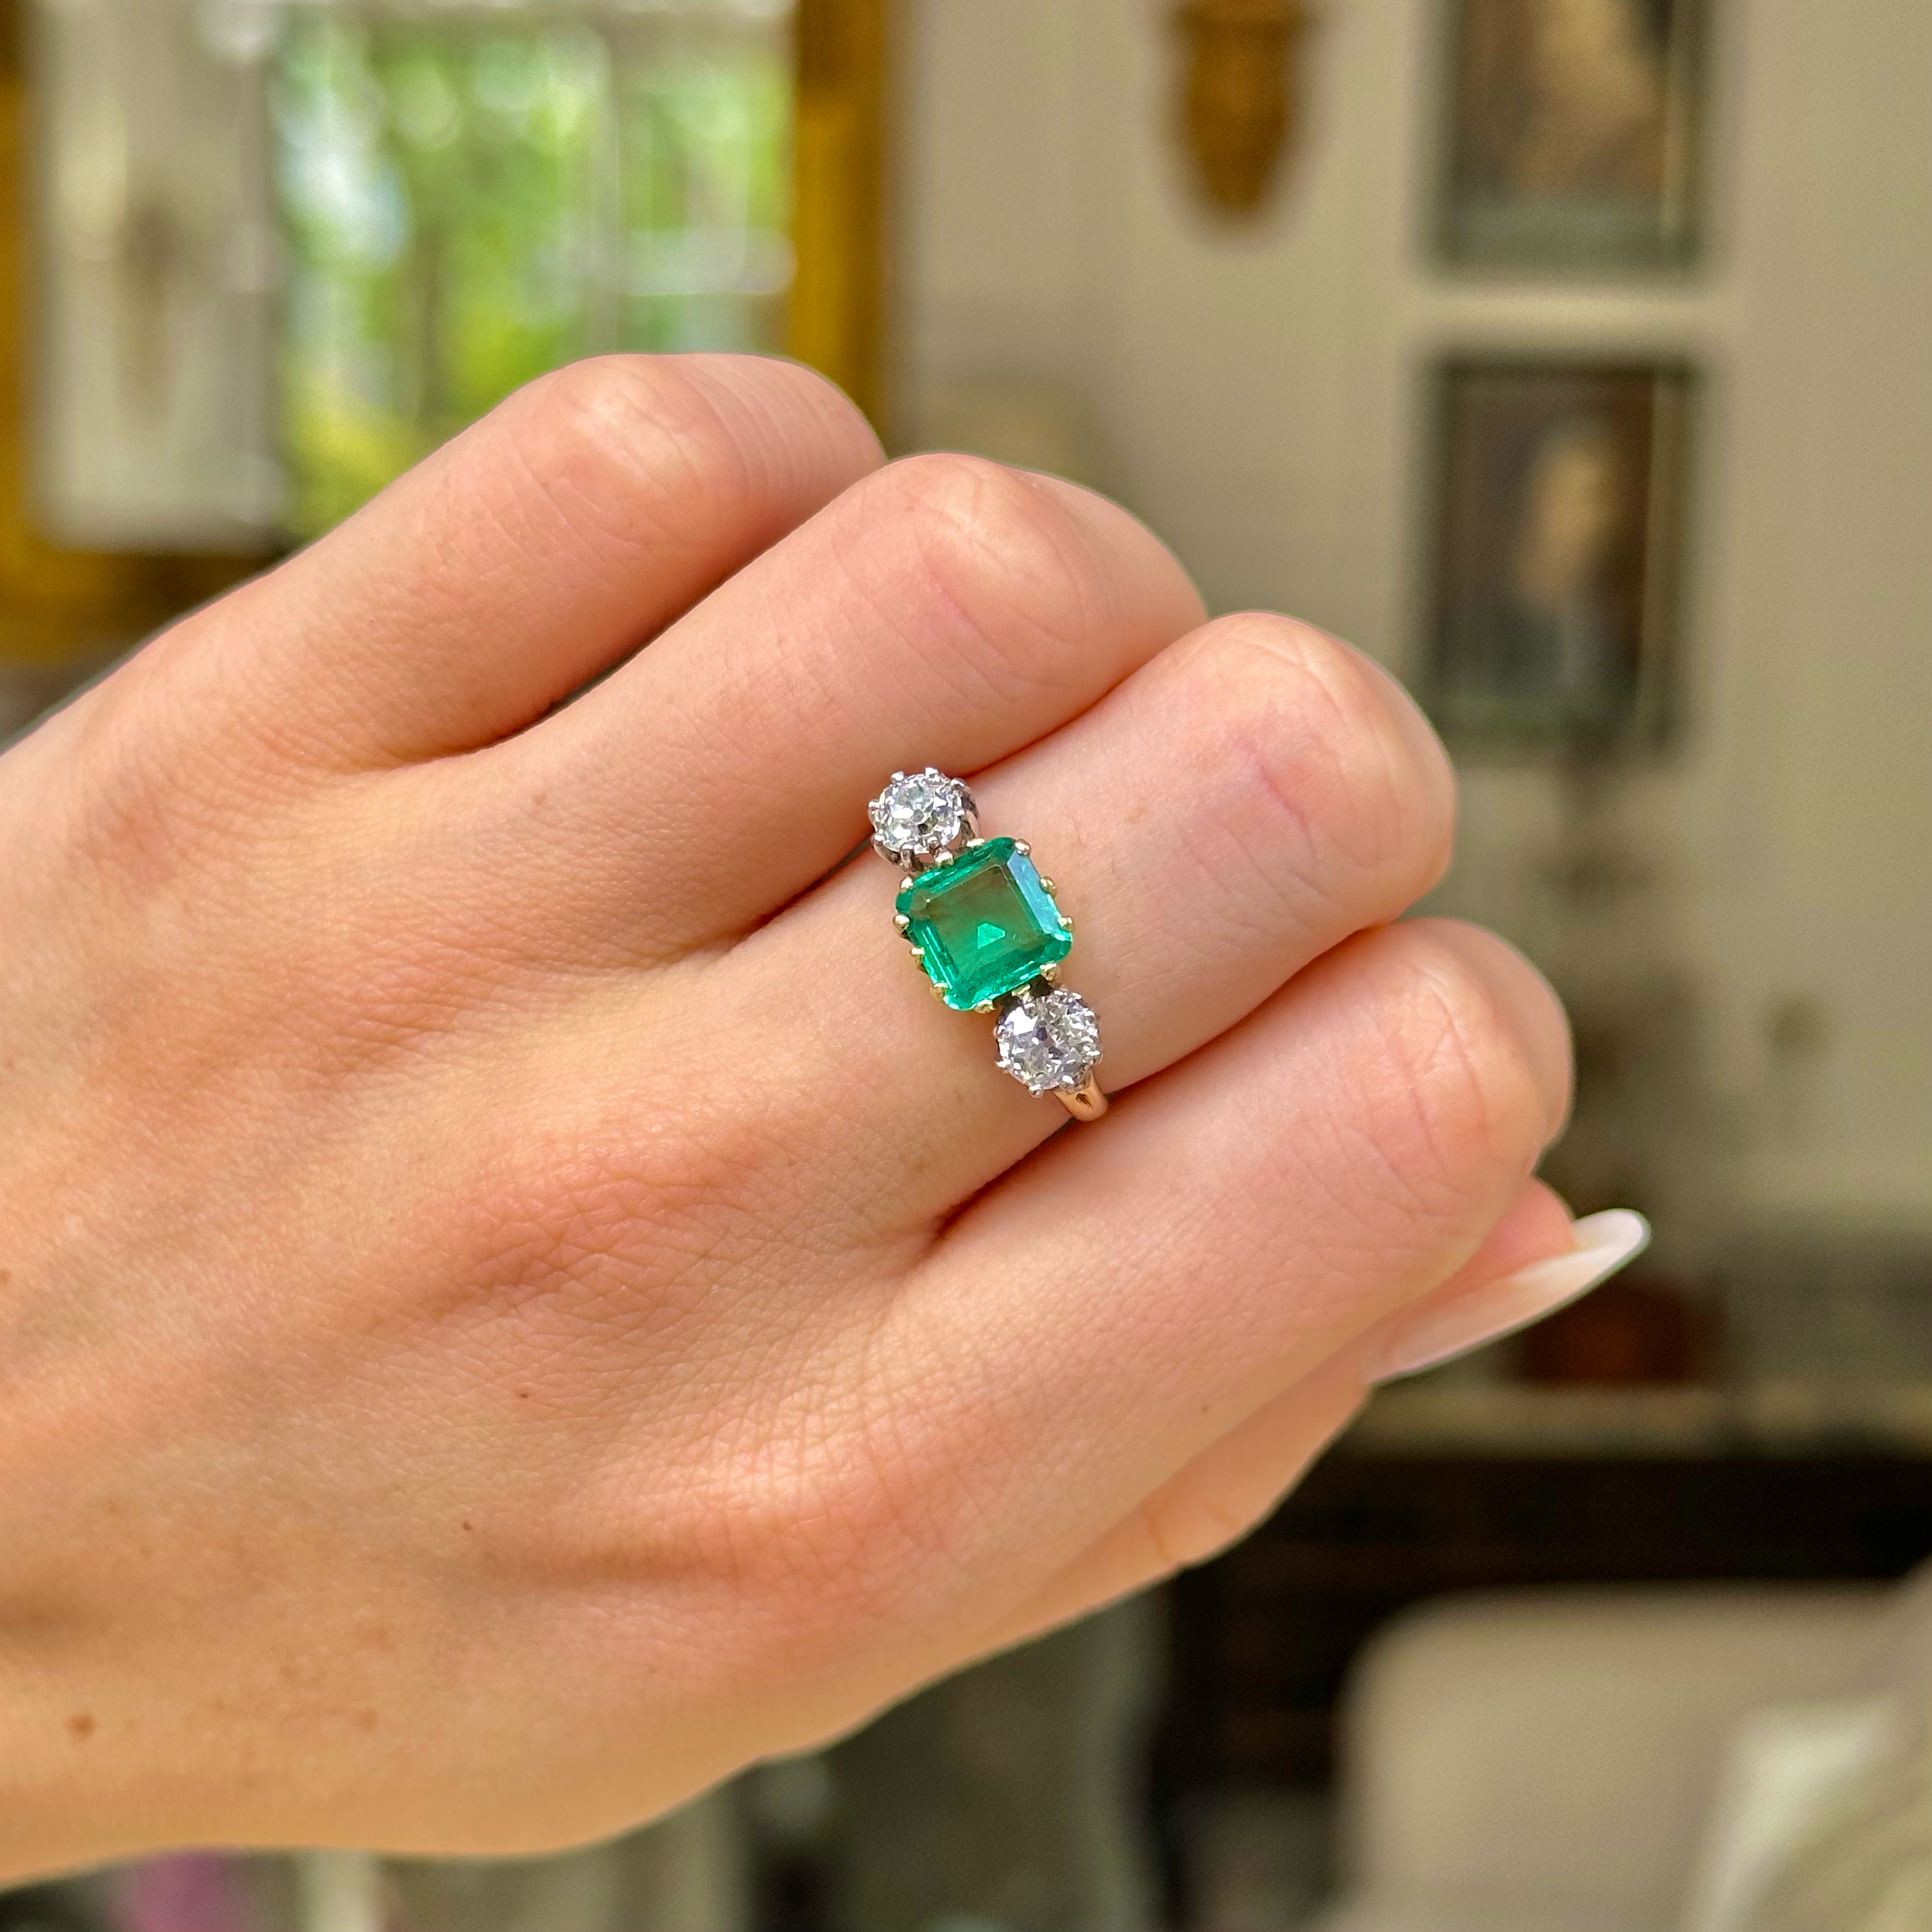 Two Stone Ring with Diamond Shield and Green Emerald – Harold Stevens